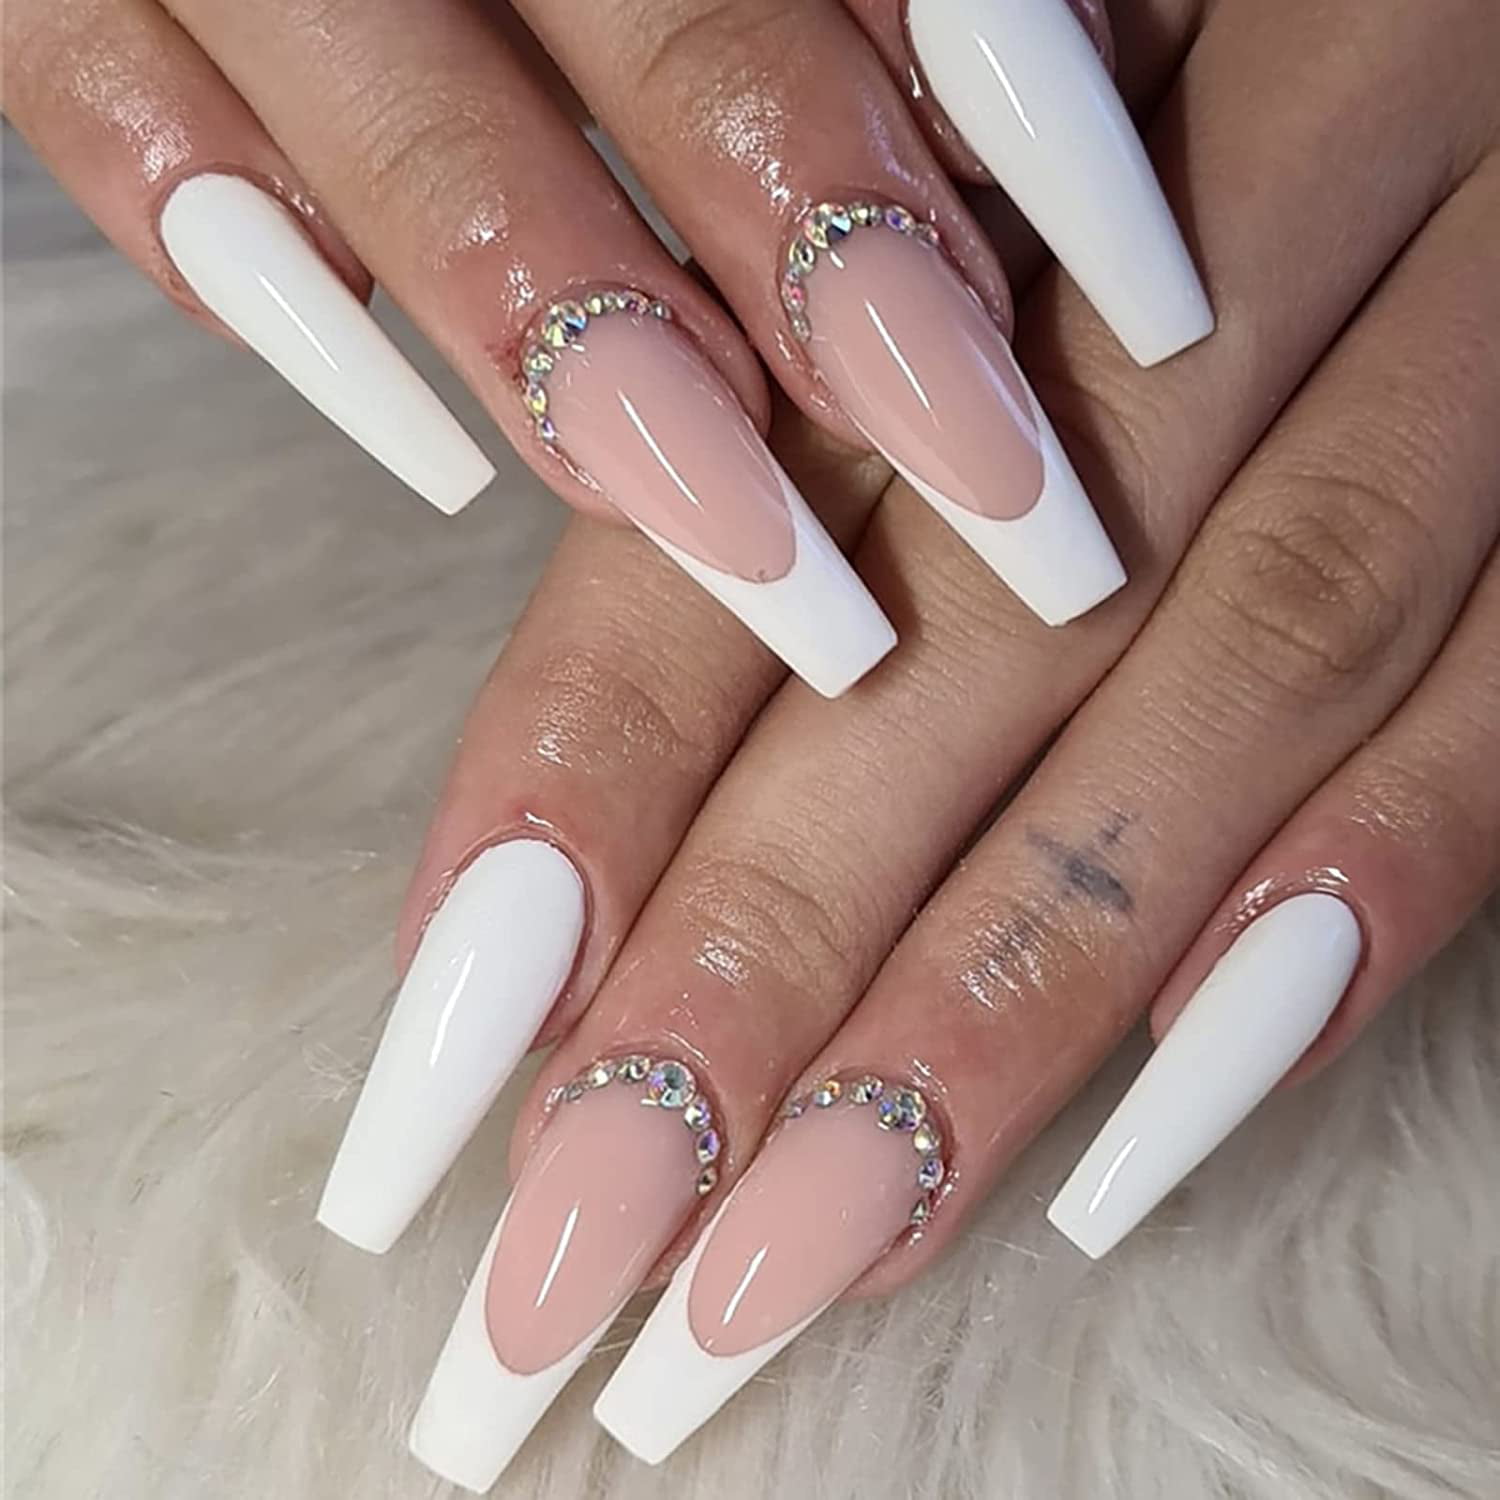 25 Best Homecoming Nail Ideas 2019 - Cute Nail Designs for Homecoming